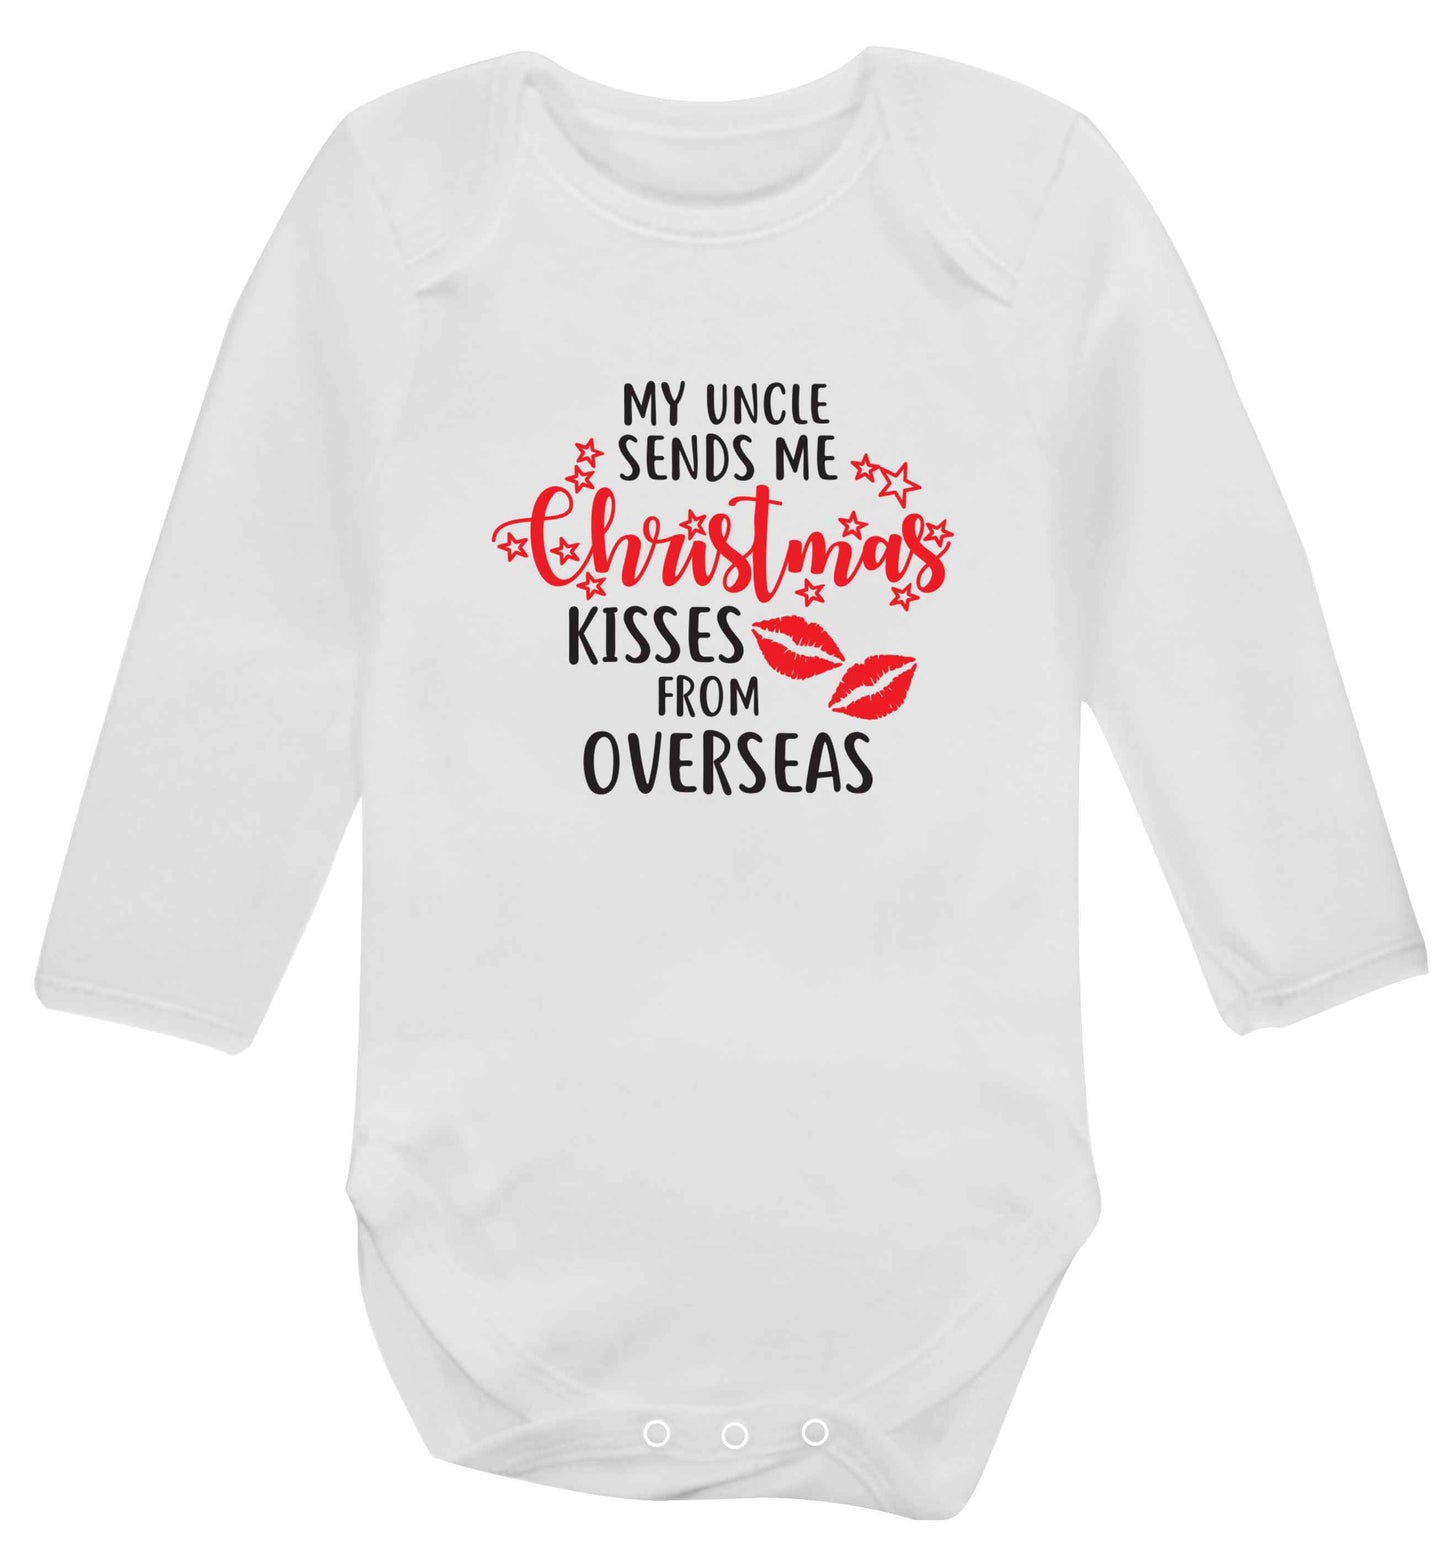 Brother Christmas Kisses Overseas baby vest long sleeved white 6-12 months